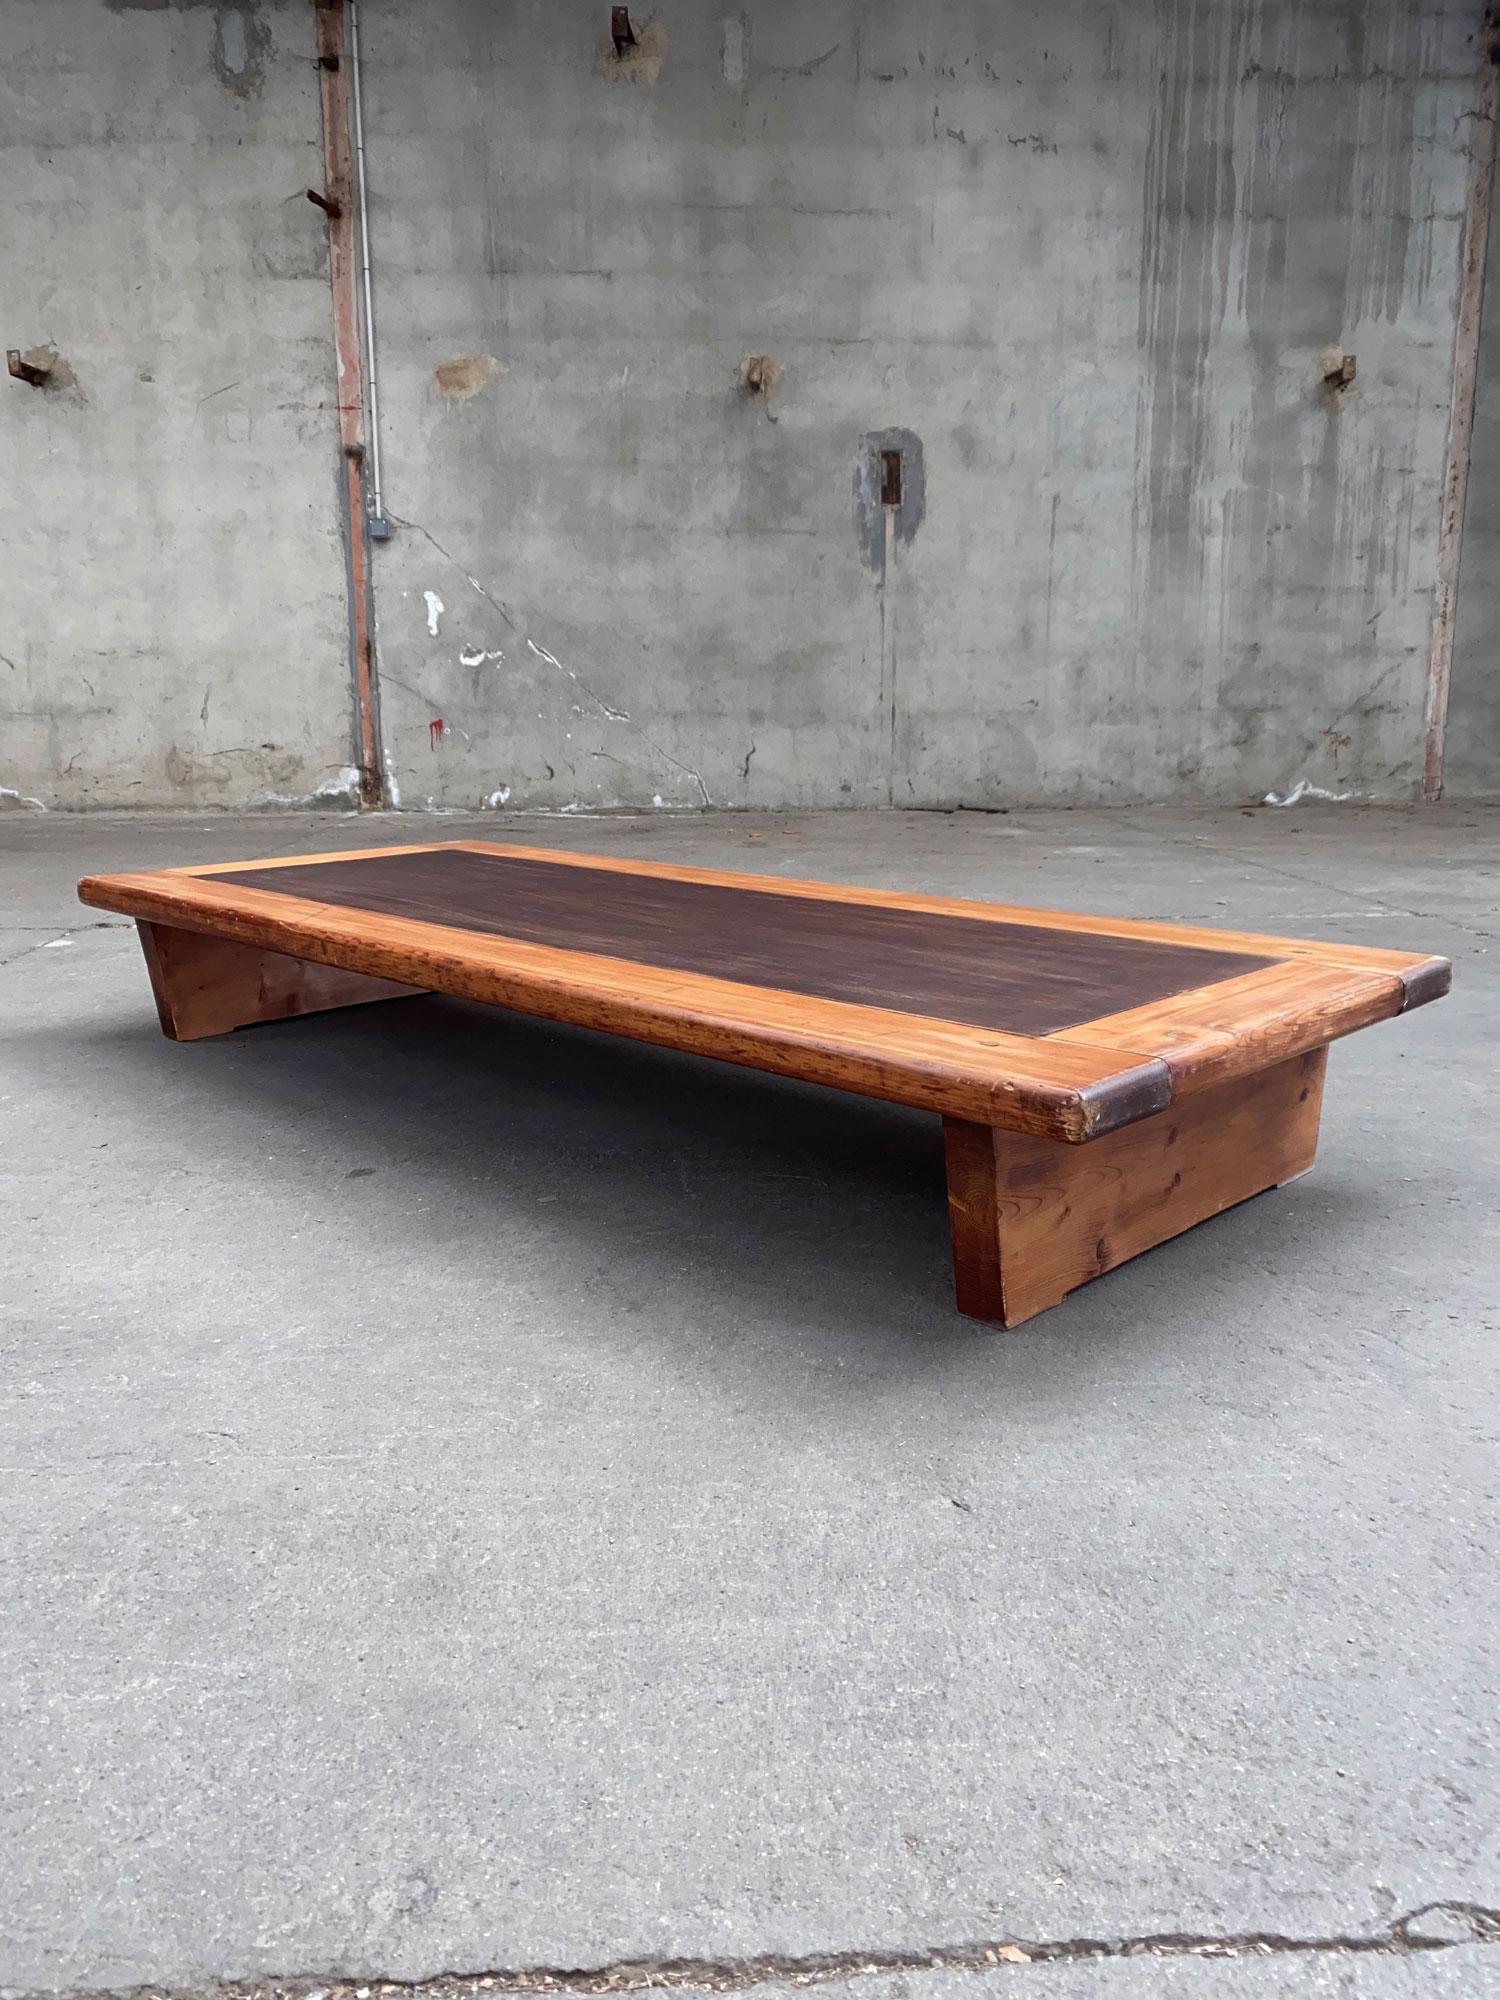 Charlotte Perriand worked from 1946 in Meribel les Allues, she often approached the architect and friend Christian Durupt for the fitting out of her chalets in the ski resort. This bench comes from a 1950 chalet in the heart of the resort. It is